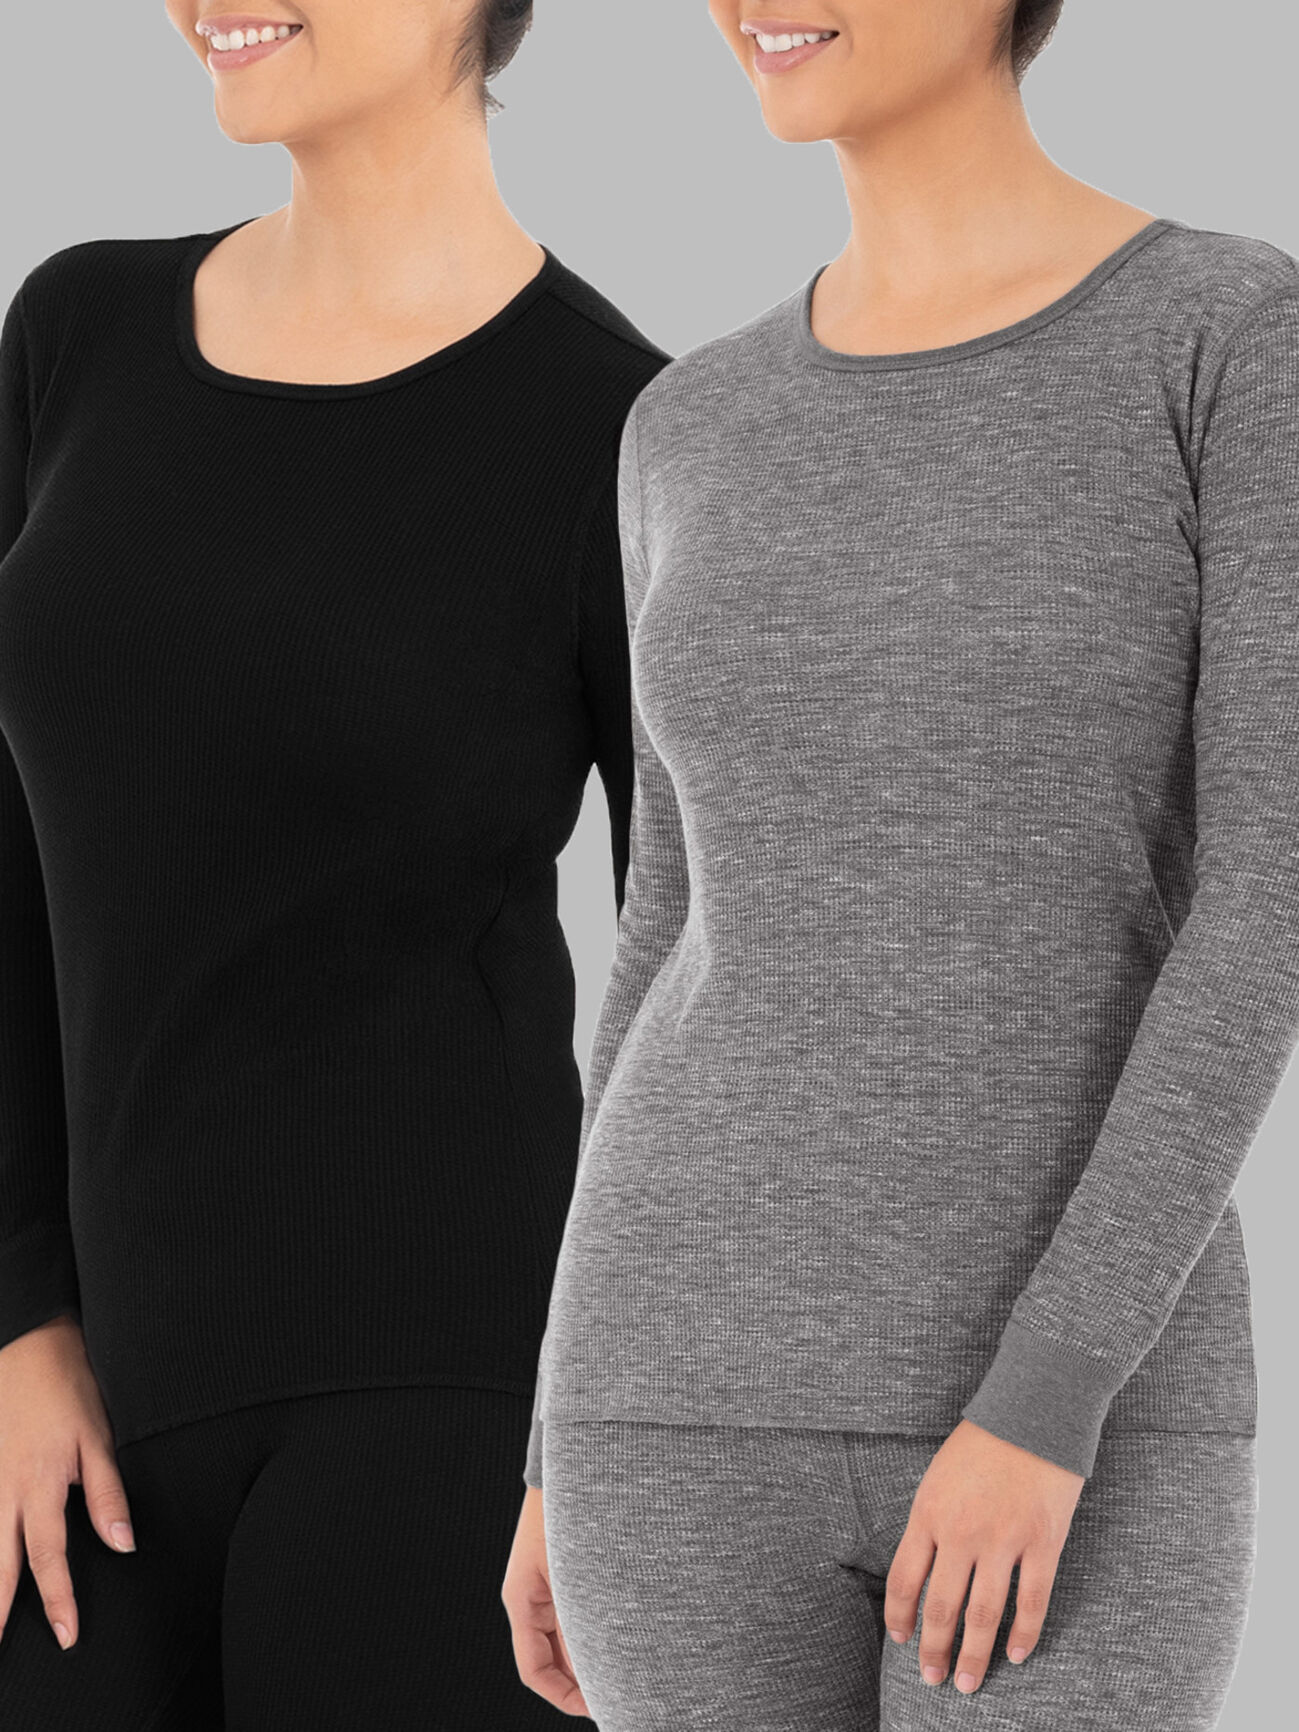 Women's Crew Neck Waffle Thermal Top, 2 Pack BLACK/SMOKE INJECTION HEATHER